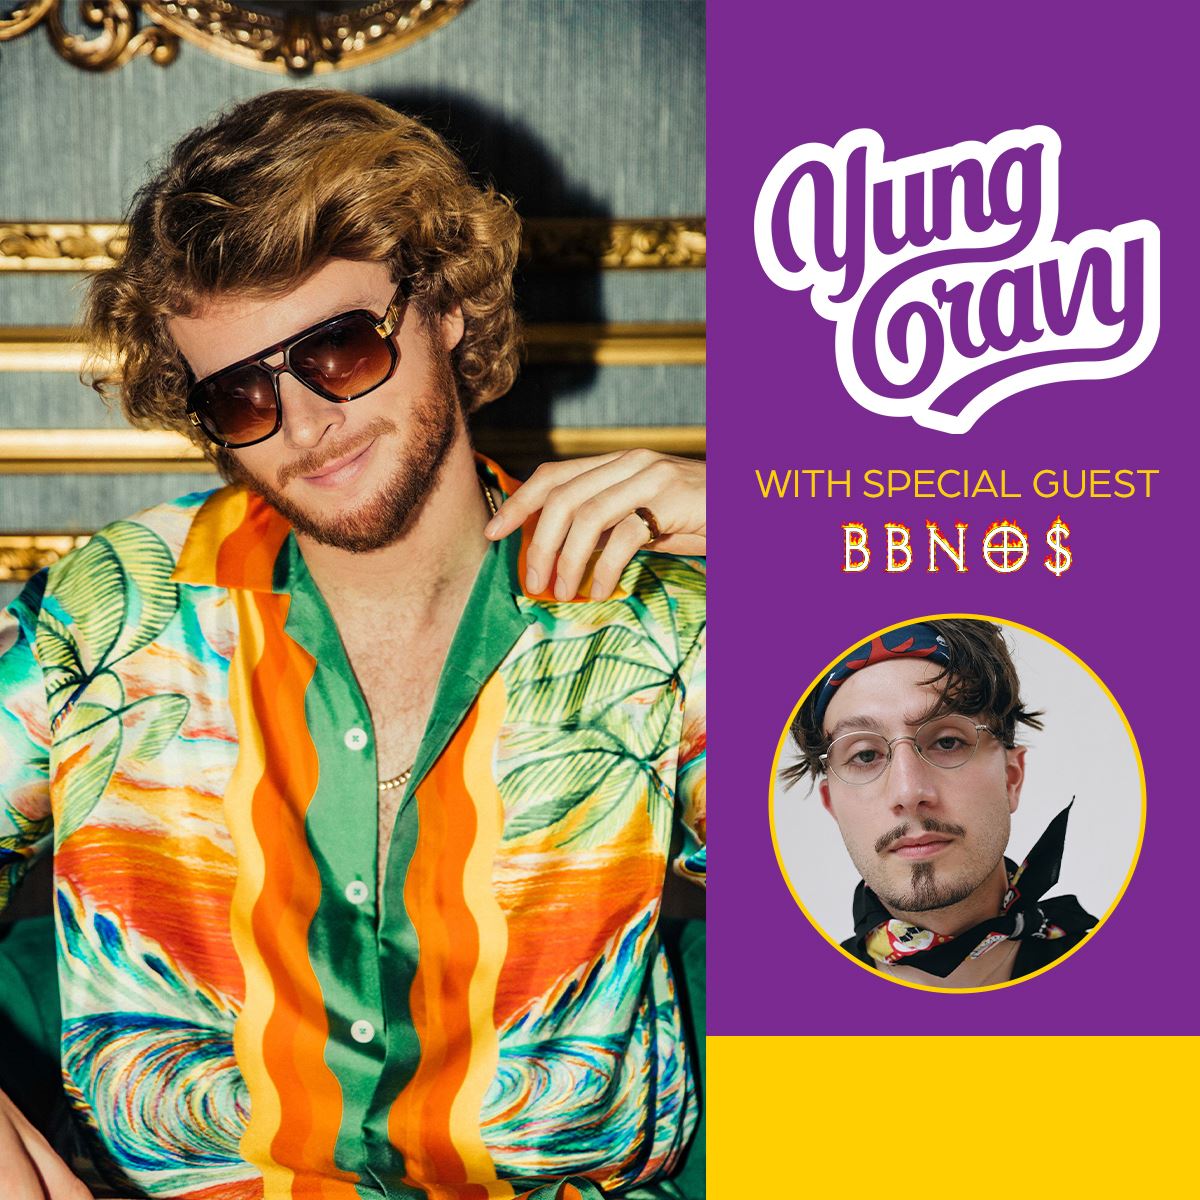 Yung Gravy with special guest BBNO$